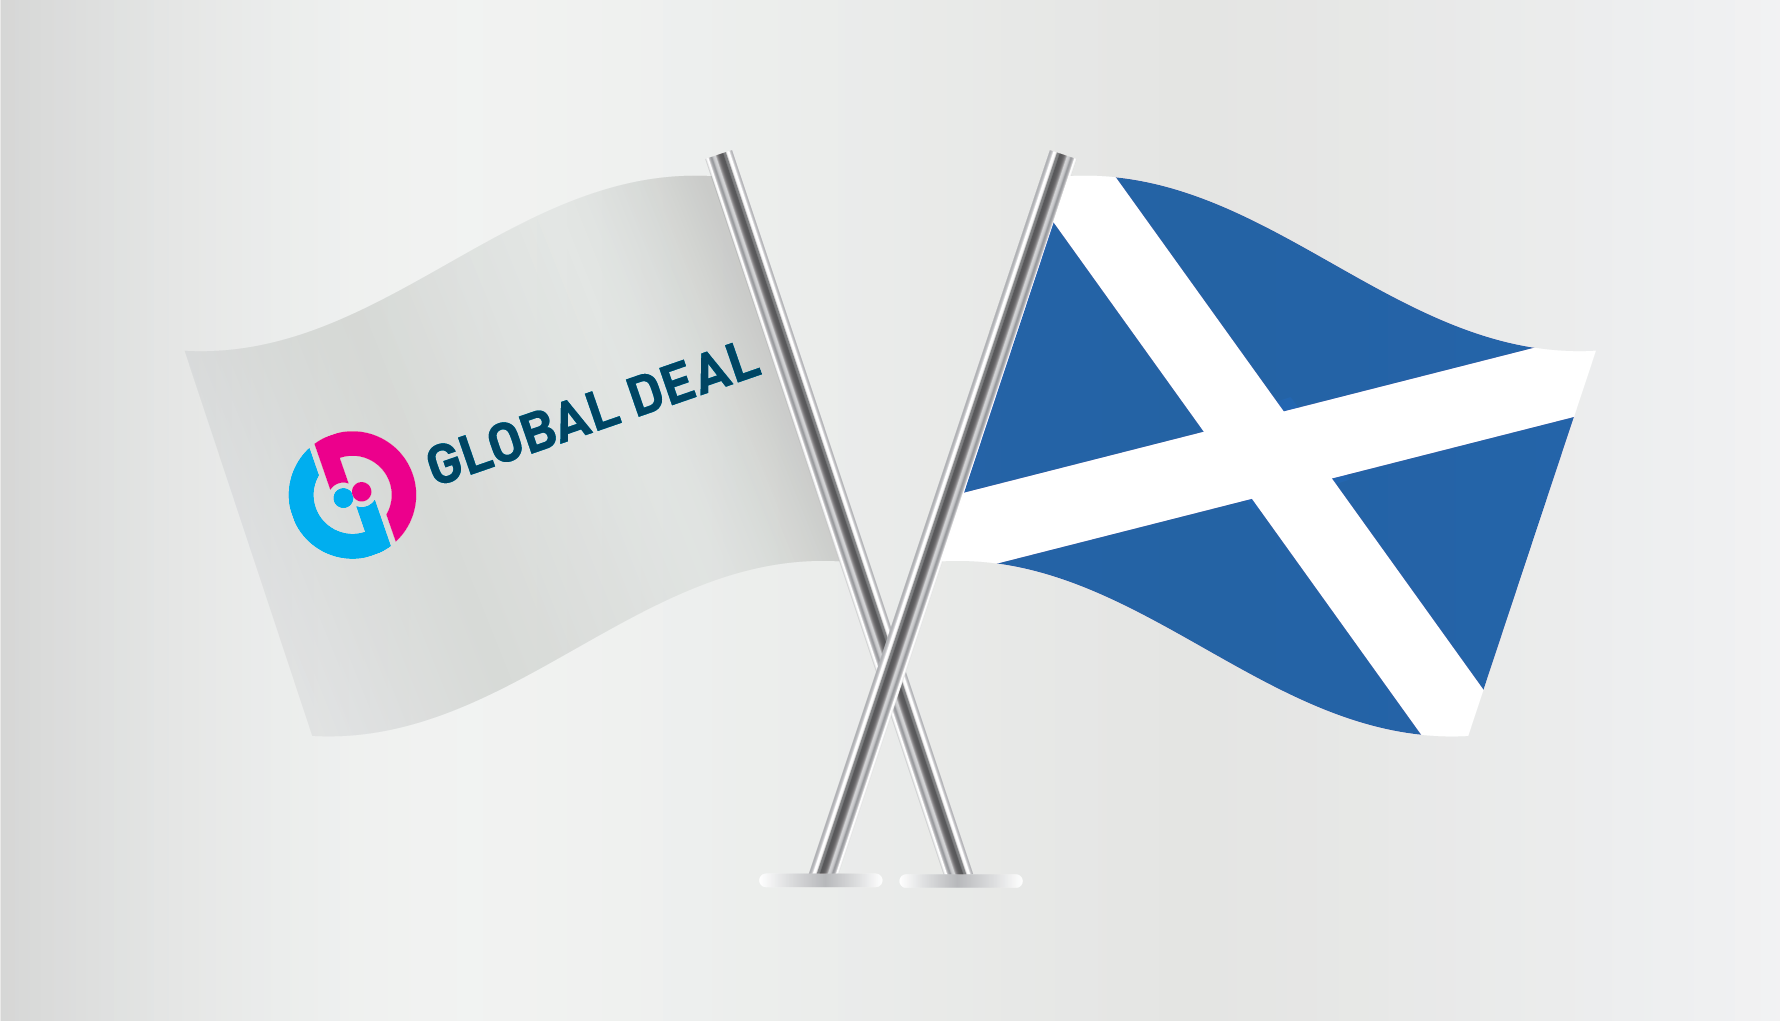 Scotland joins the Global Deal